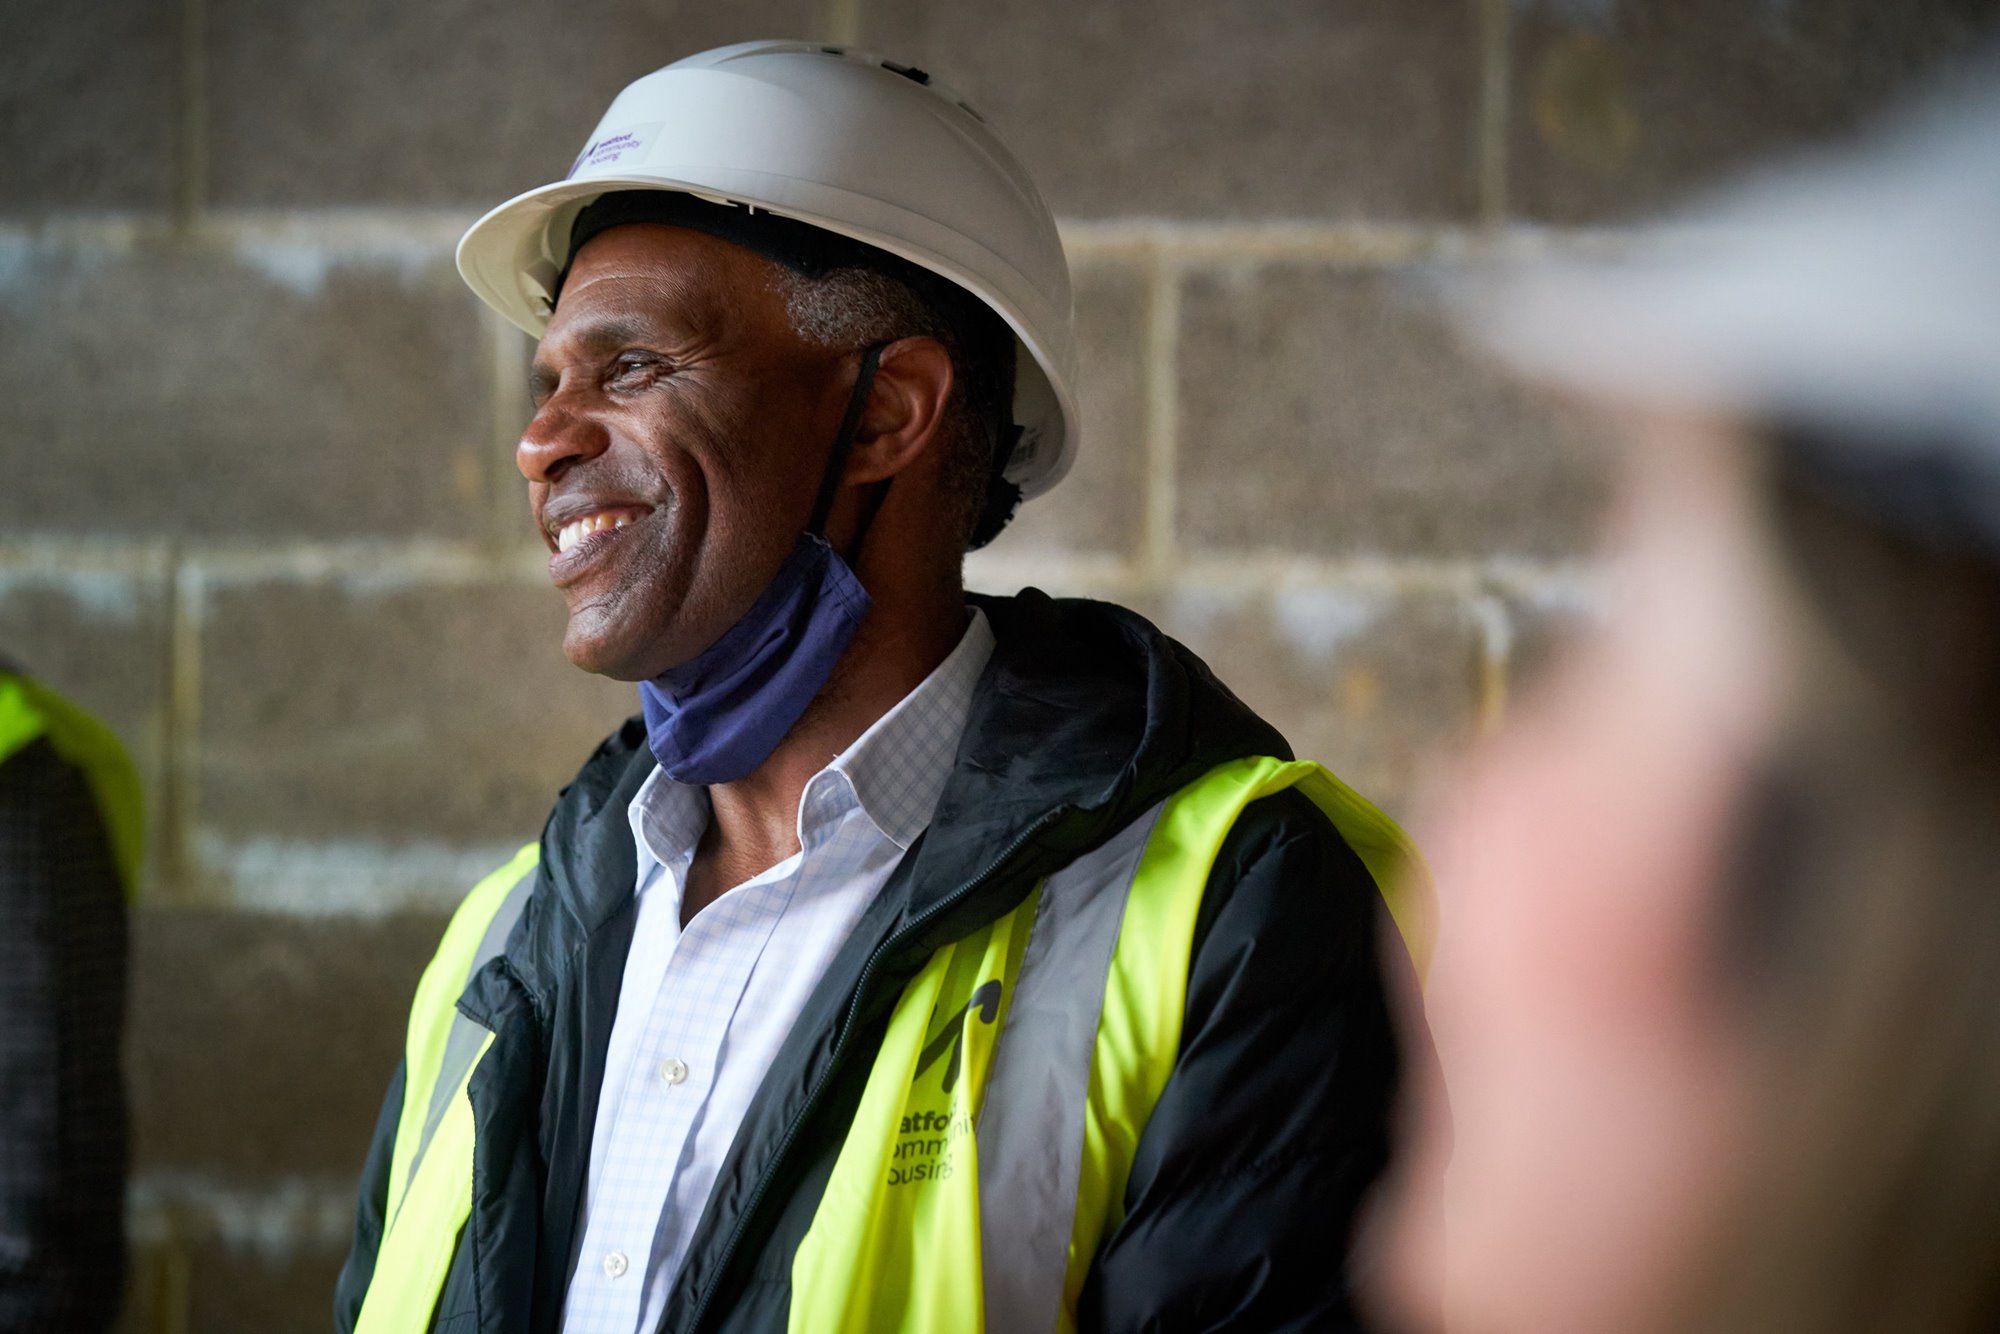 Local legend lends his name to new social housing development